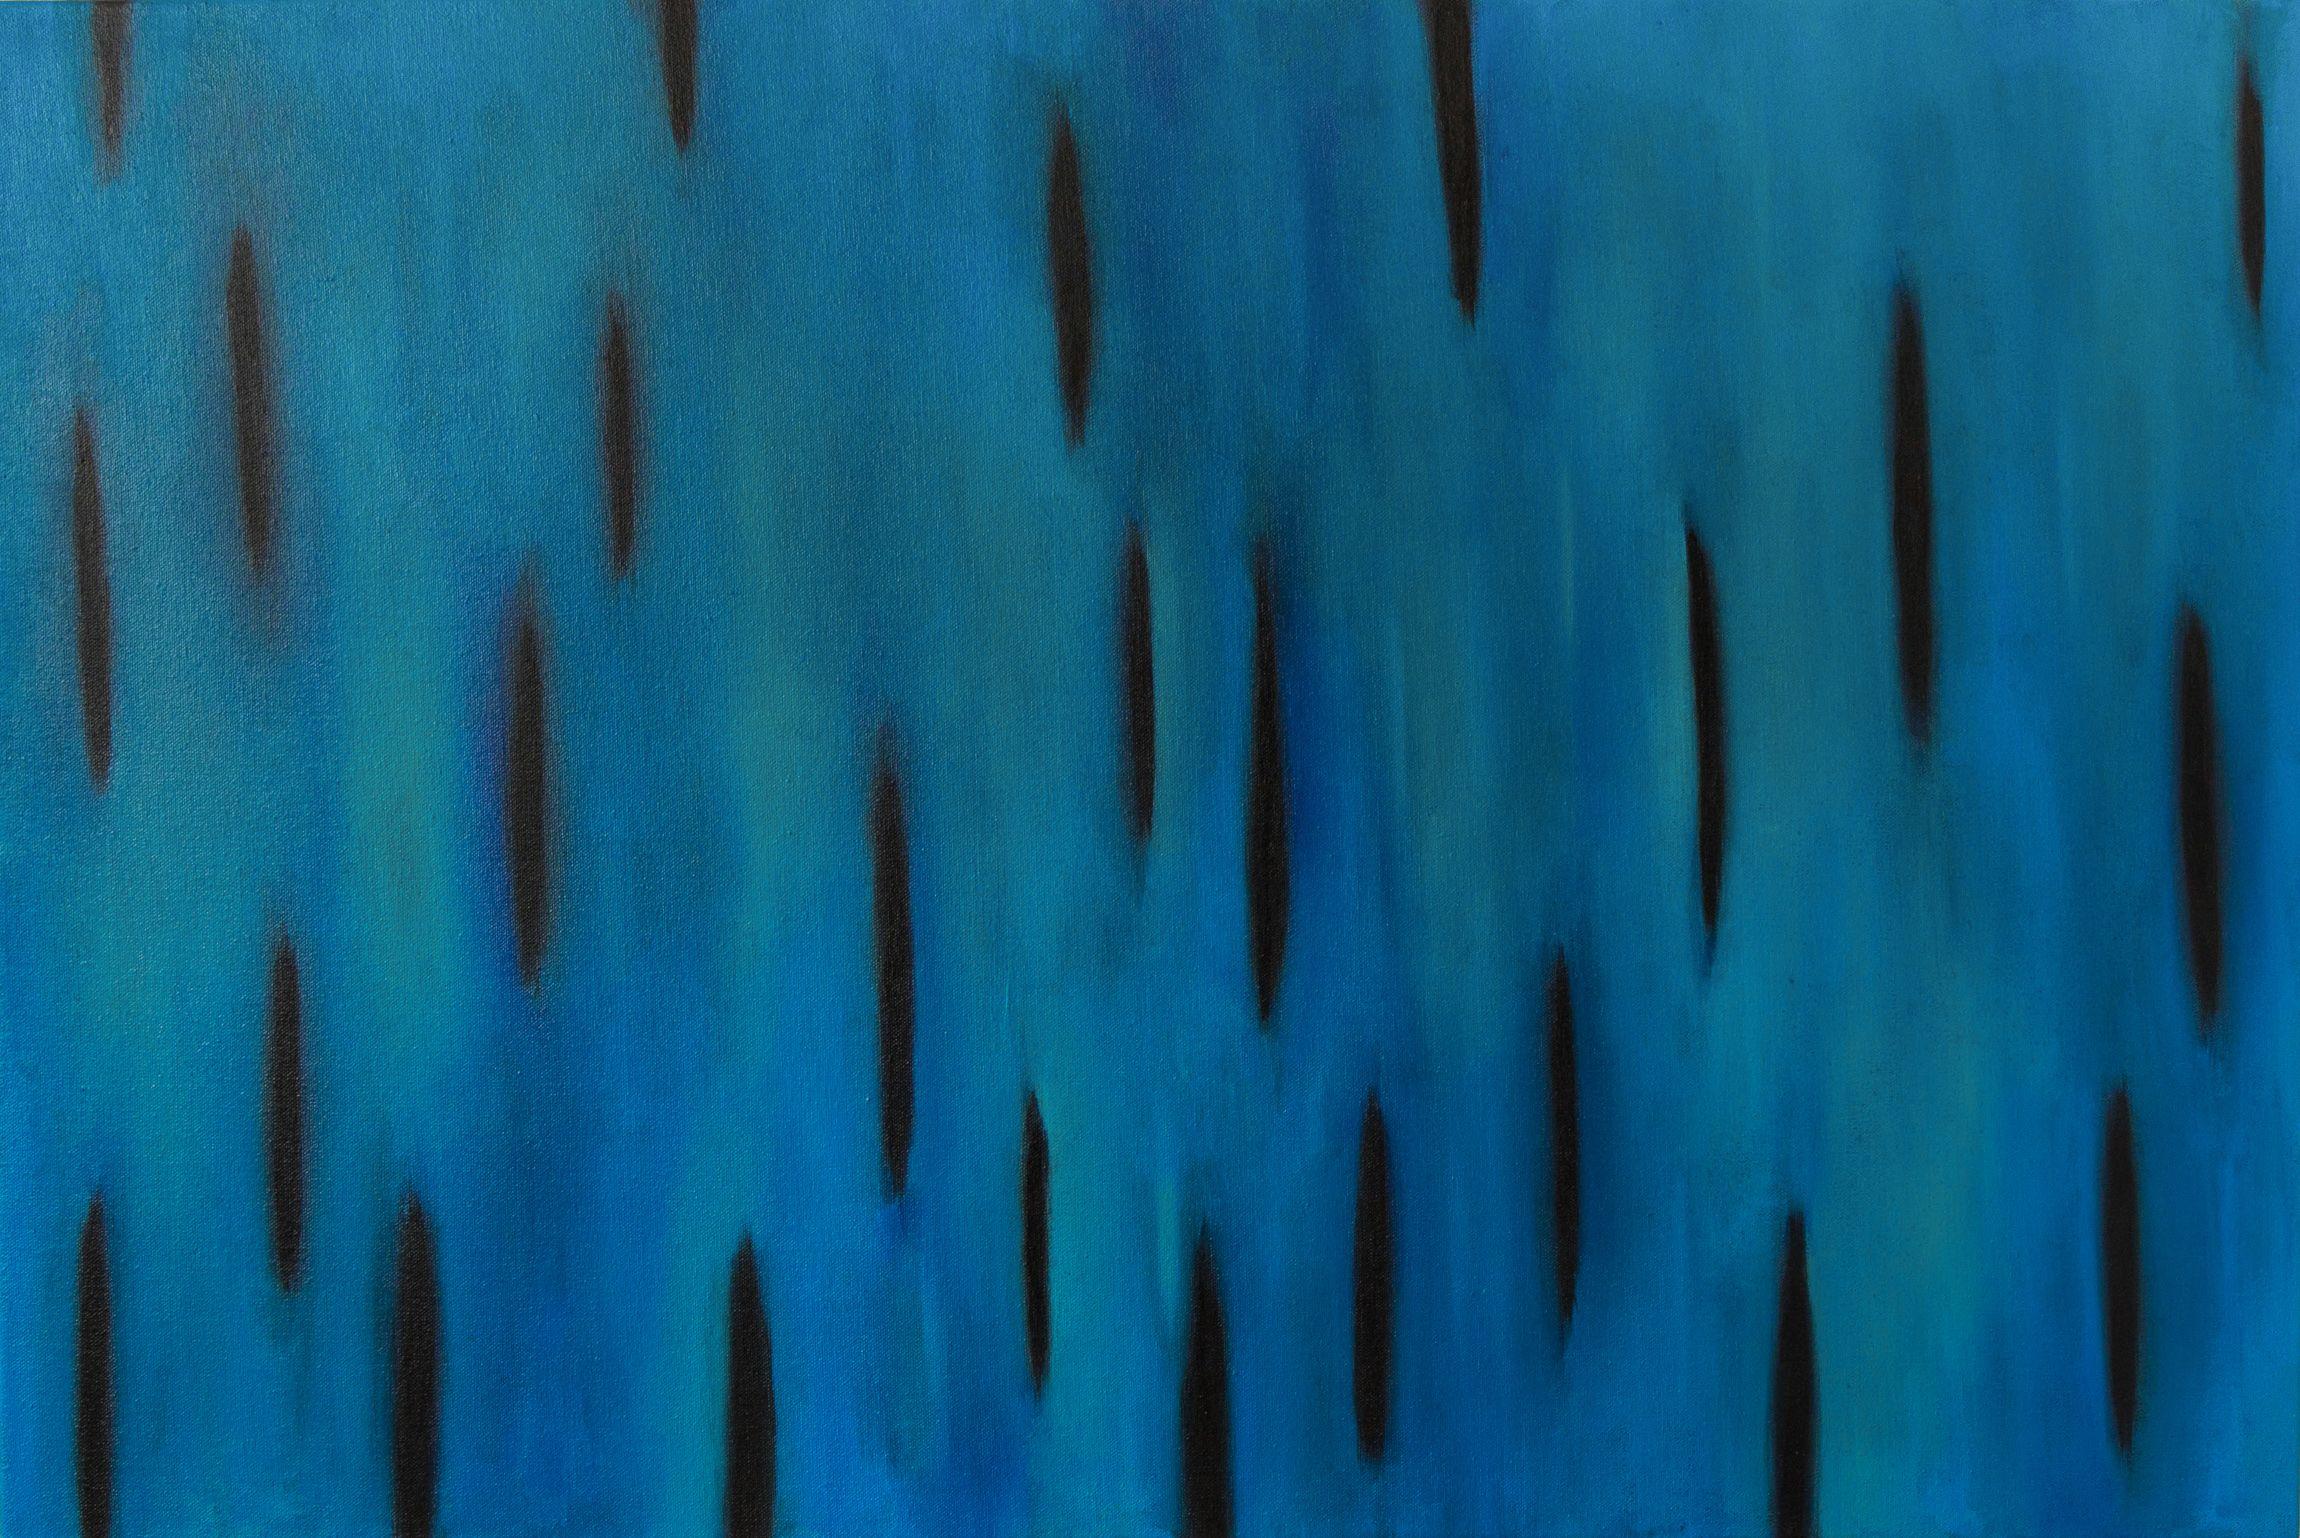 Stefan Fierros Abstract Painting - The gathering, Painting, Acrylic on Canvas